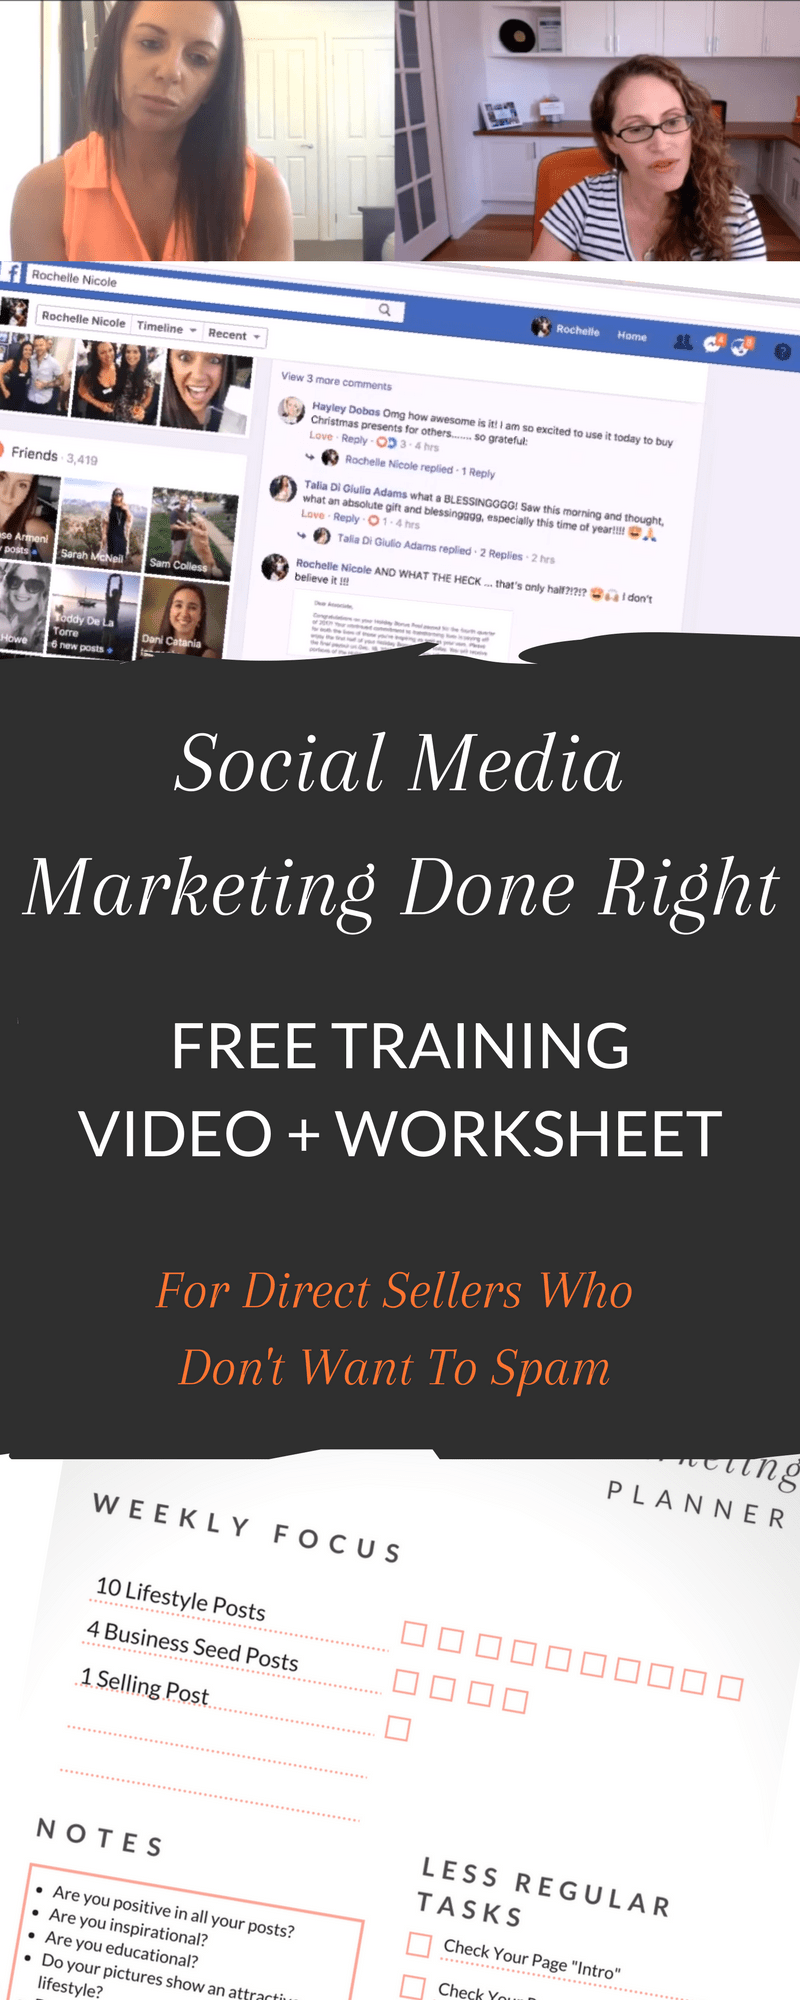 You want to do #SocialMedia #Marketing for your #DirectSelling business. But you don't want to spam anybody. Check this free #training video on #AttractionMarketing with an in-depth look at a #DirectSeller's Facebook page. Grab the FREE #printable too >>